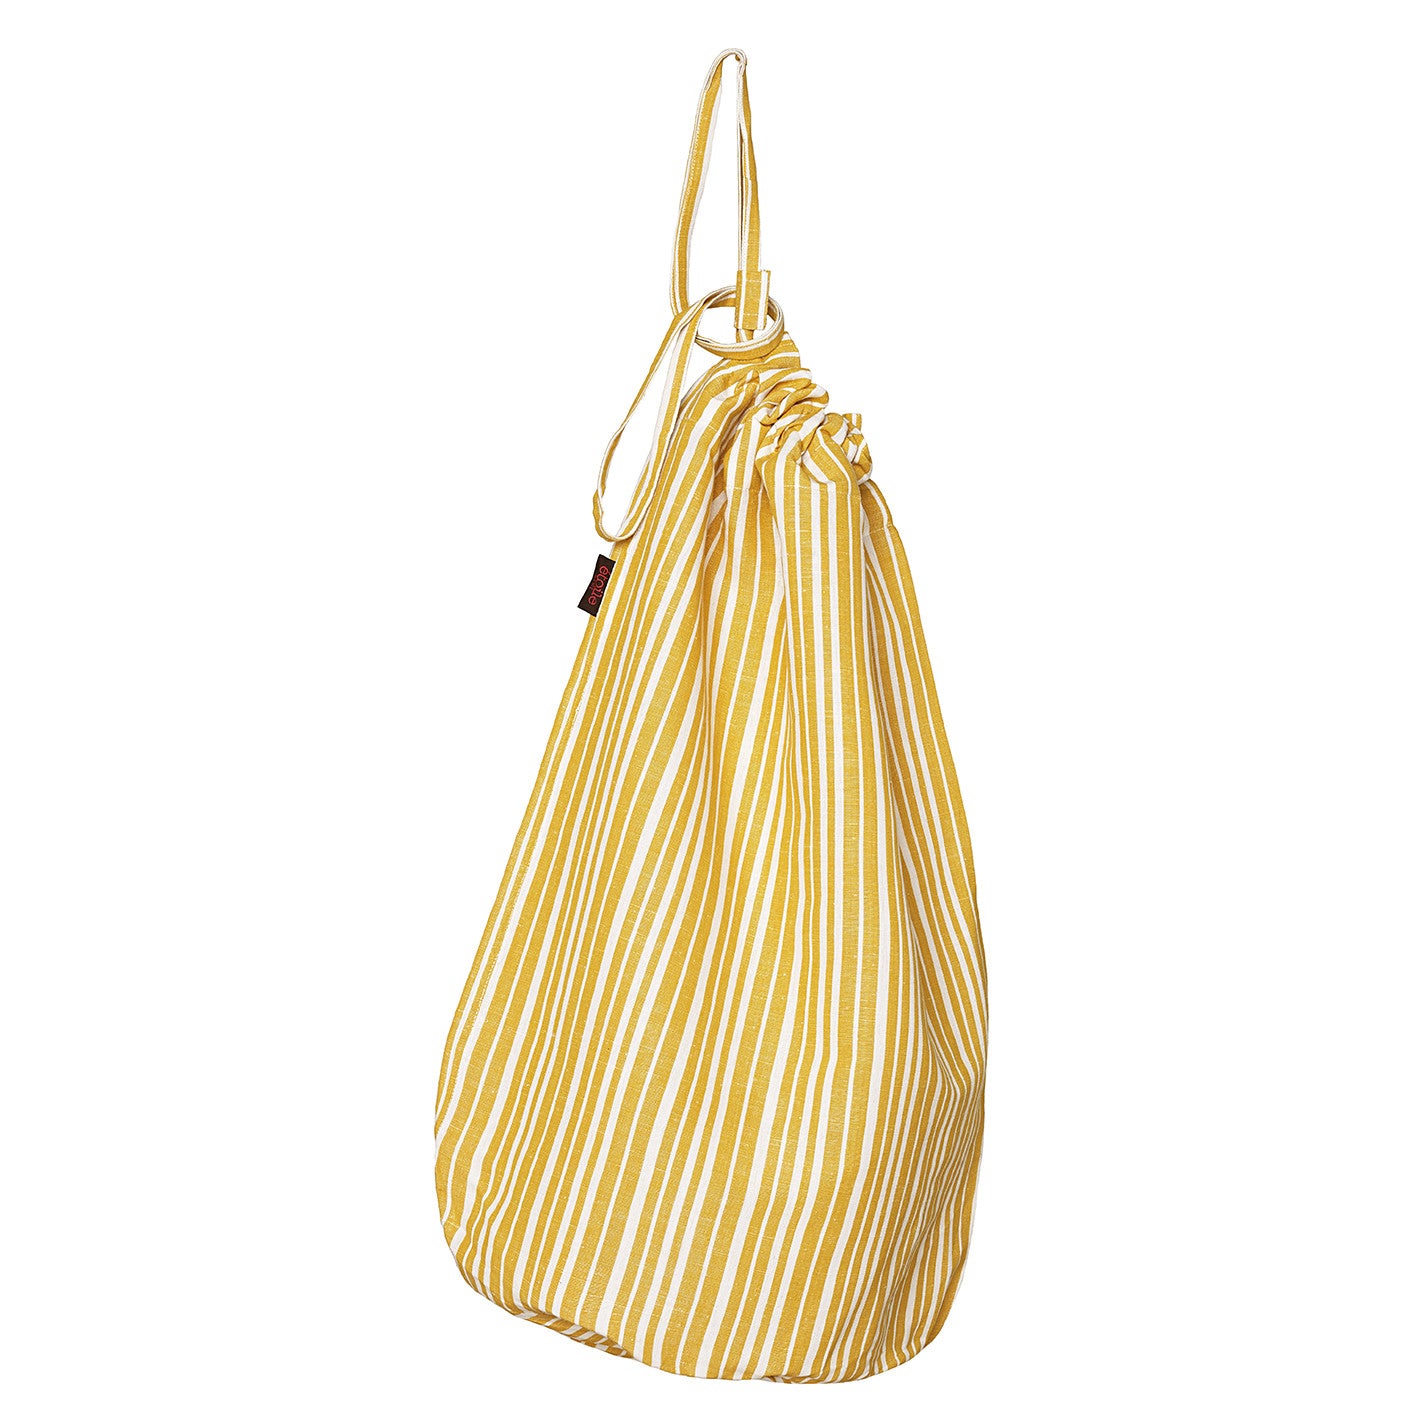 Palermo Ticking Stripe Cotton Linen Drawstring Laundry & Storage Bag in Mustard Gold Ships from Canada (USA)